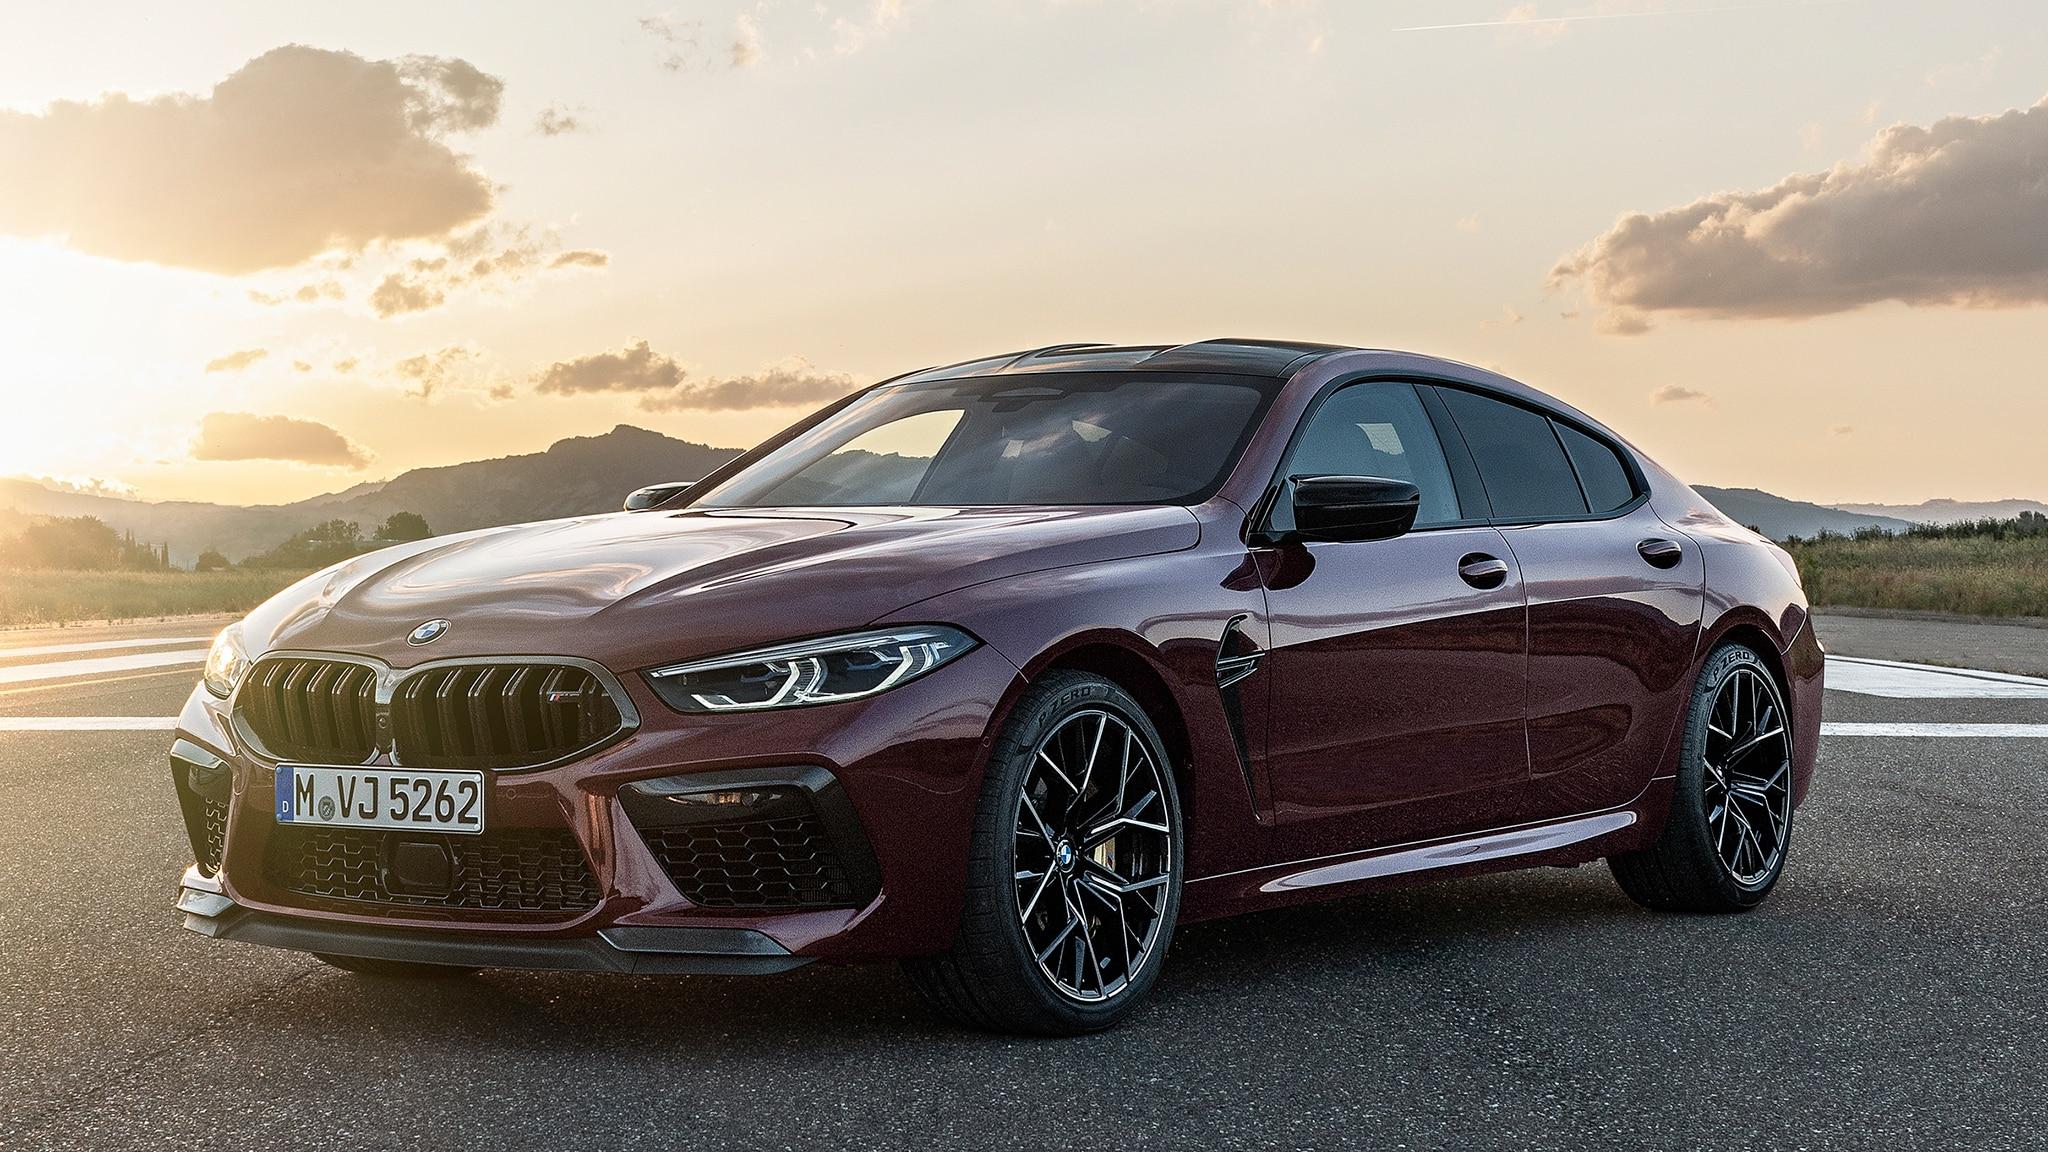 BMW M8 Gran Coupe Arrives With Four Doors and up to 617